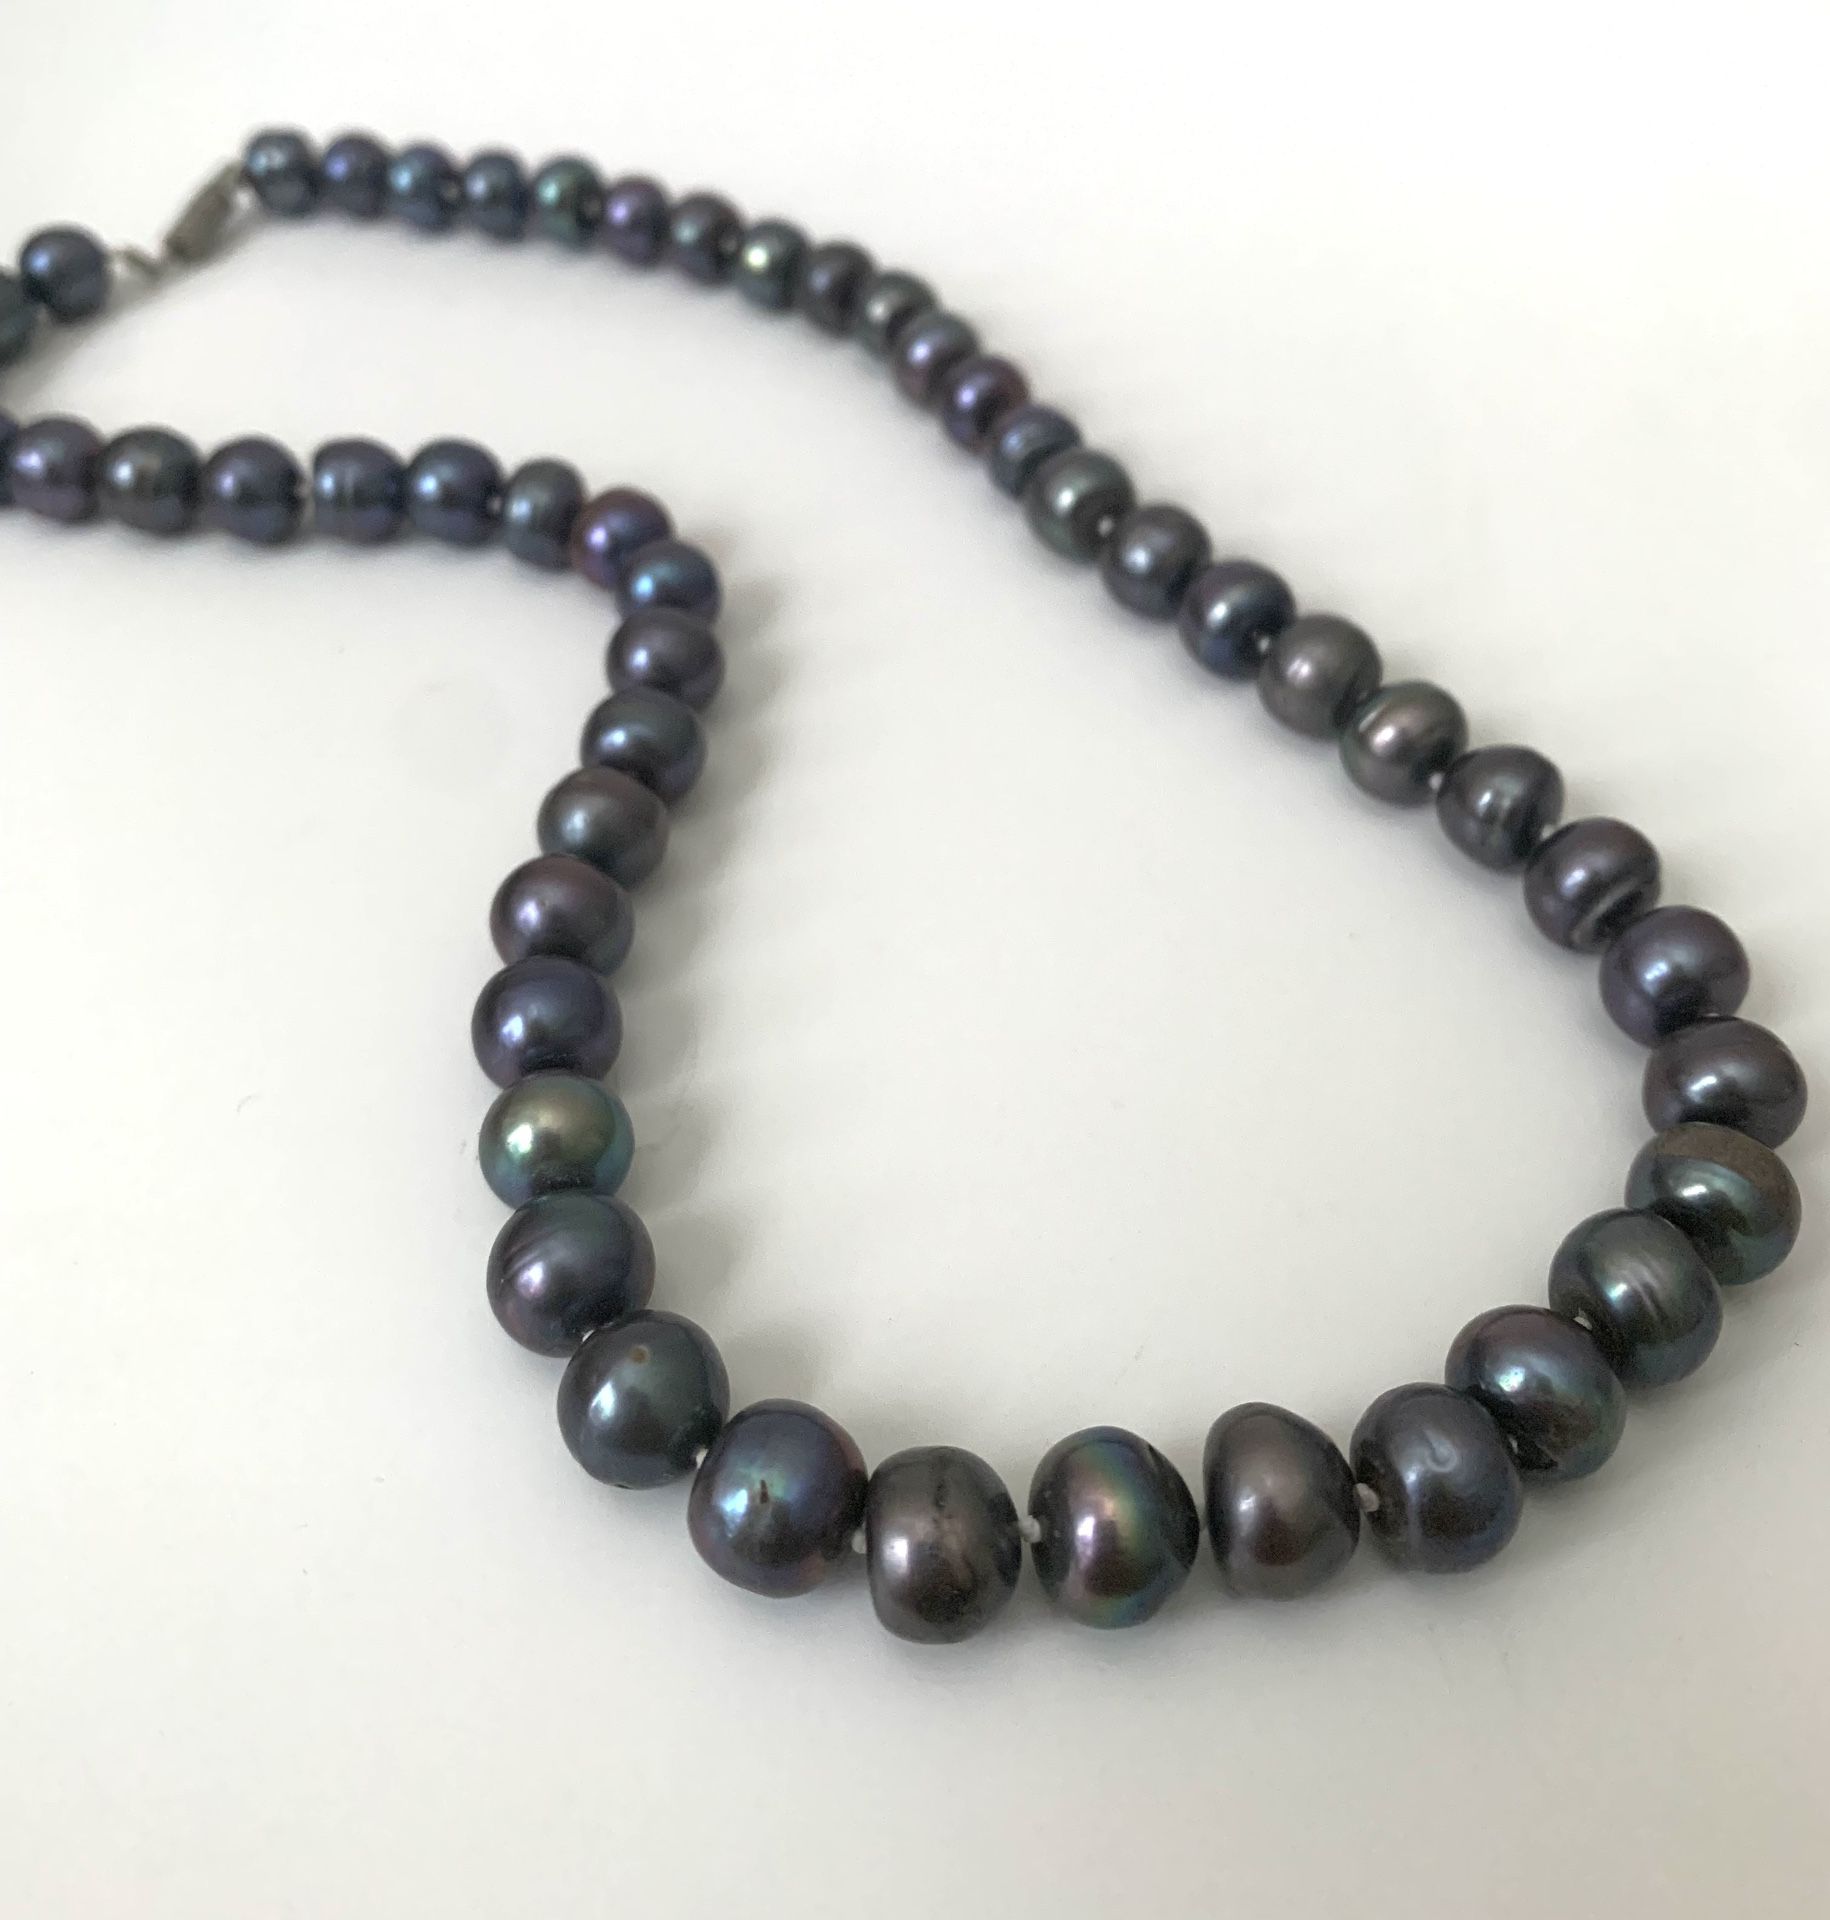 Vintage Baroque Black Cultured Freshwater Pearl Necklace / Choker, Knotted, 16.5” Long, Pearl Size 8-10mm